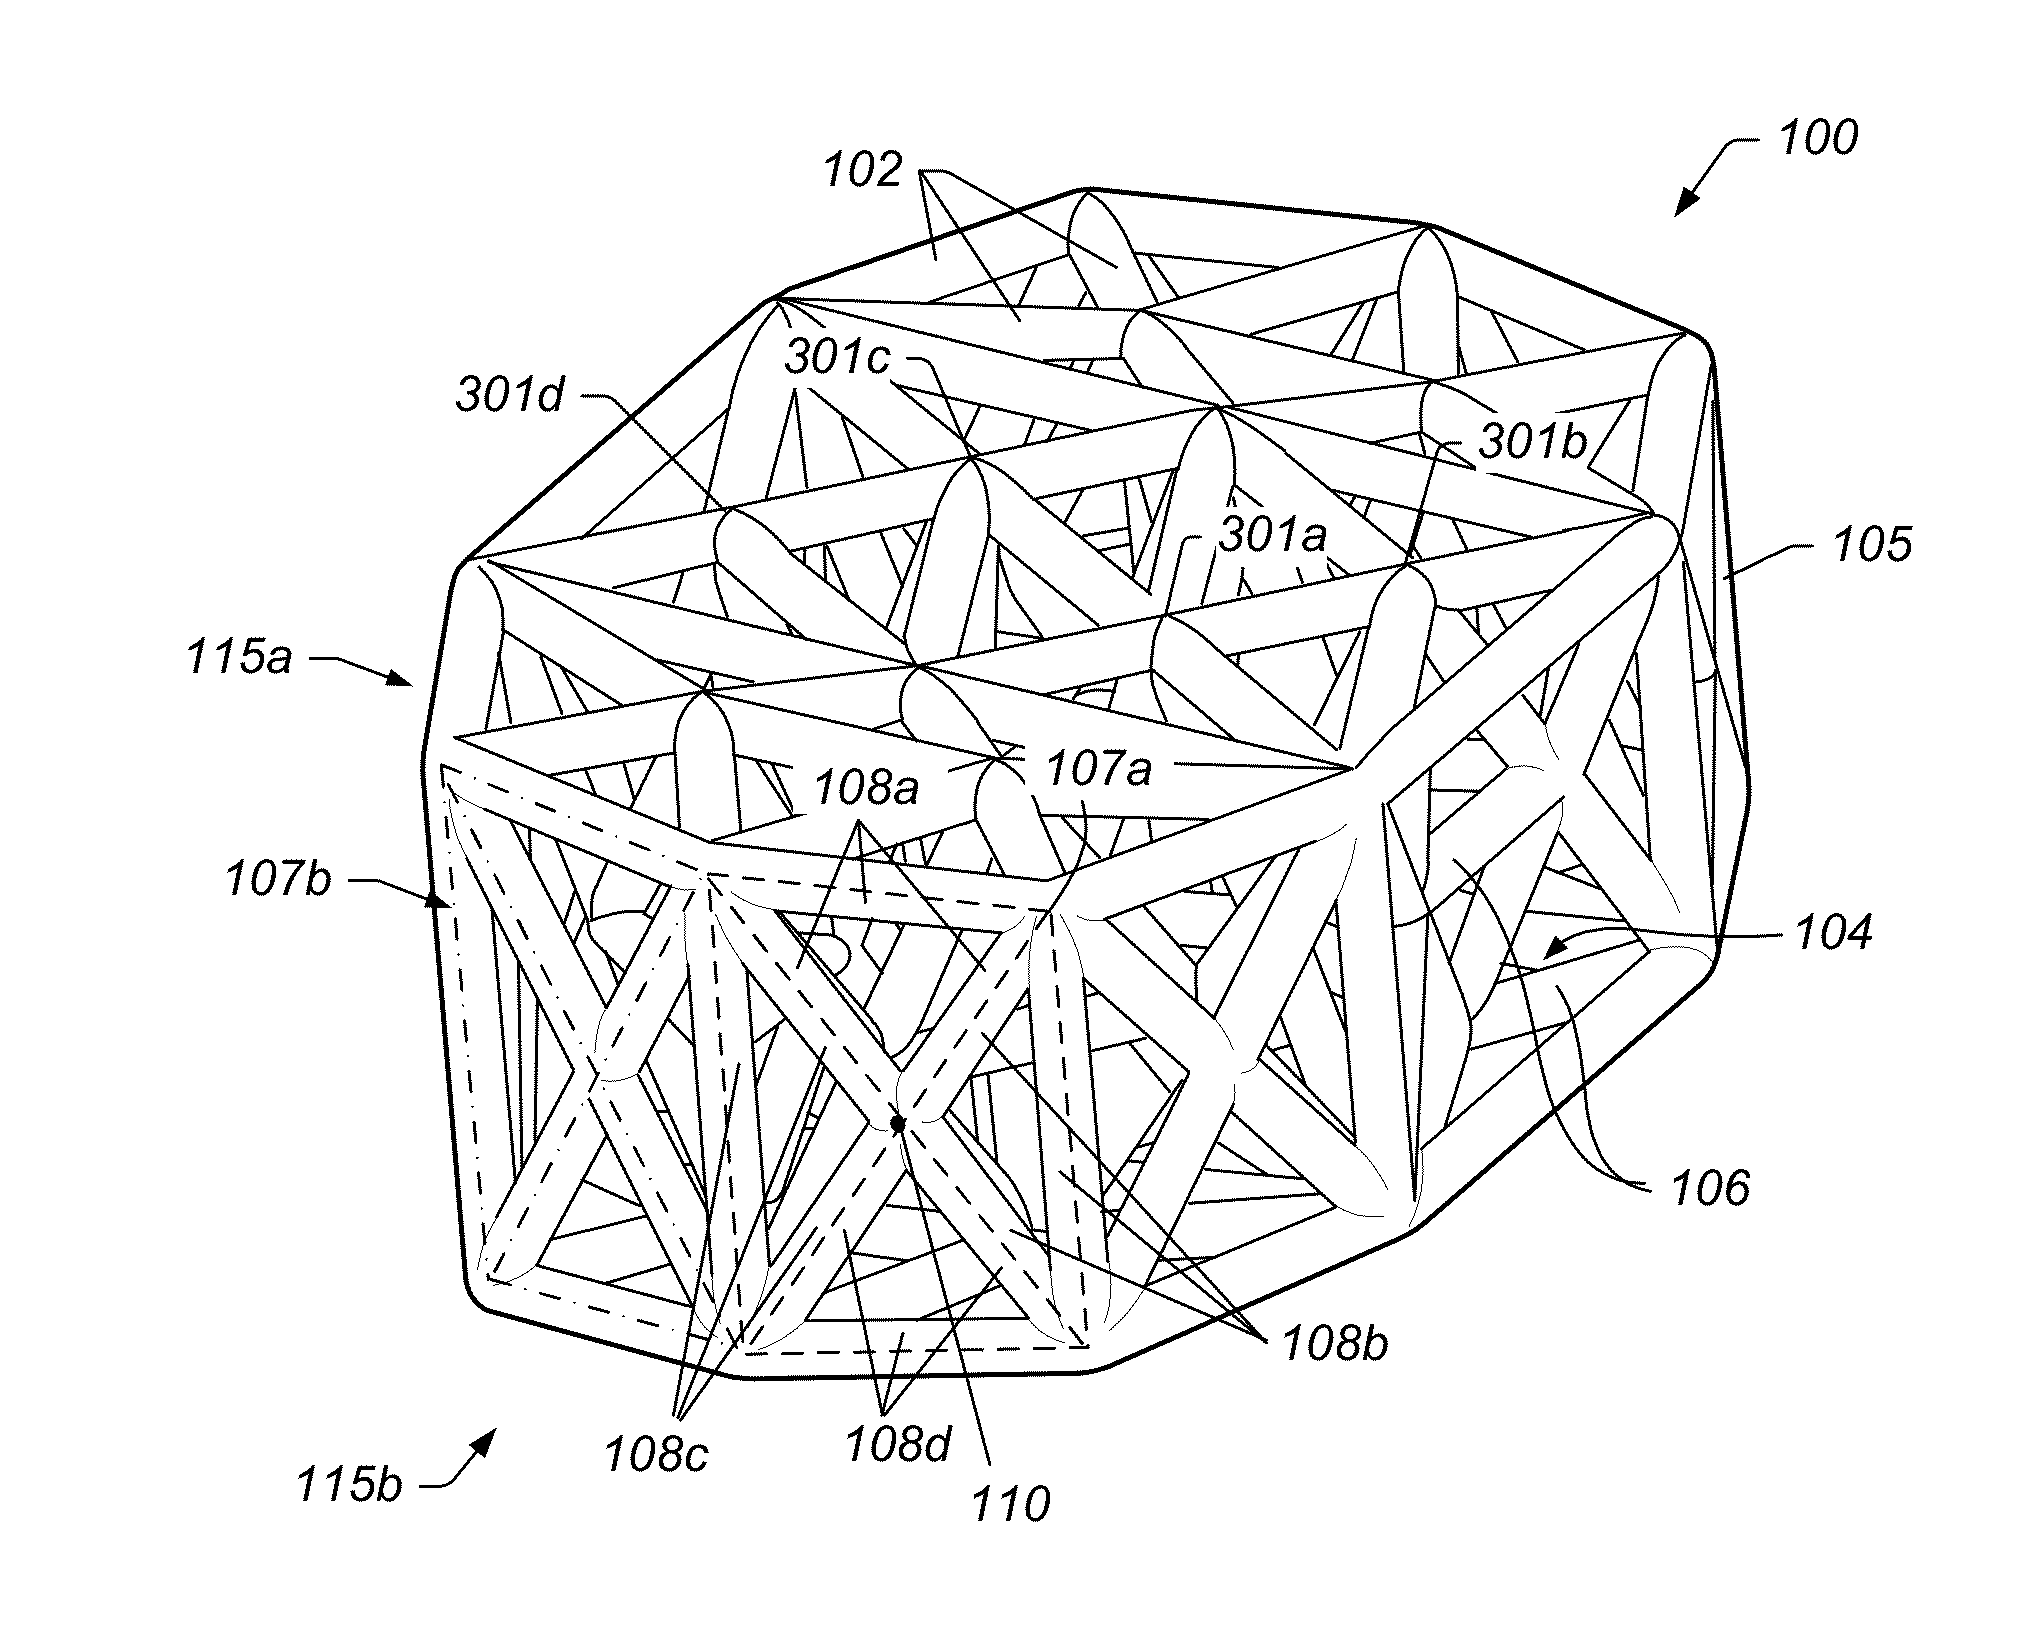 Traumatic bone fracture repair systems and methods